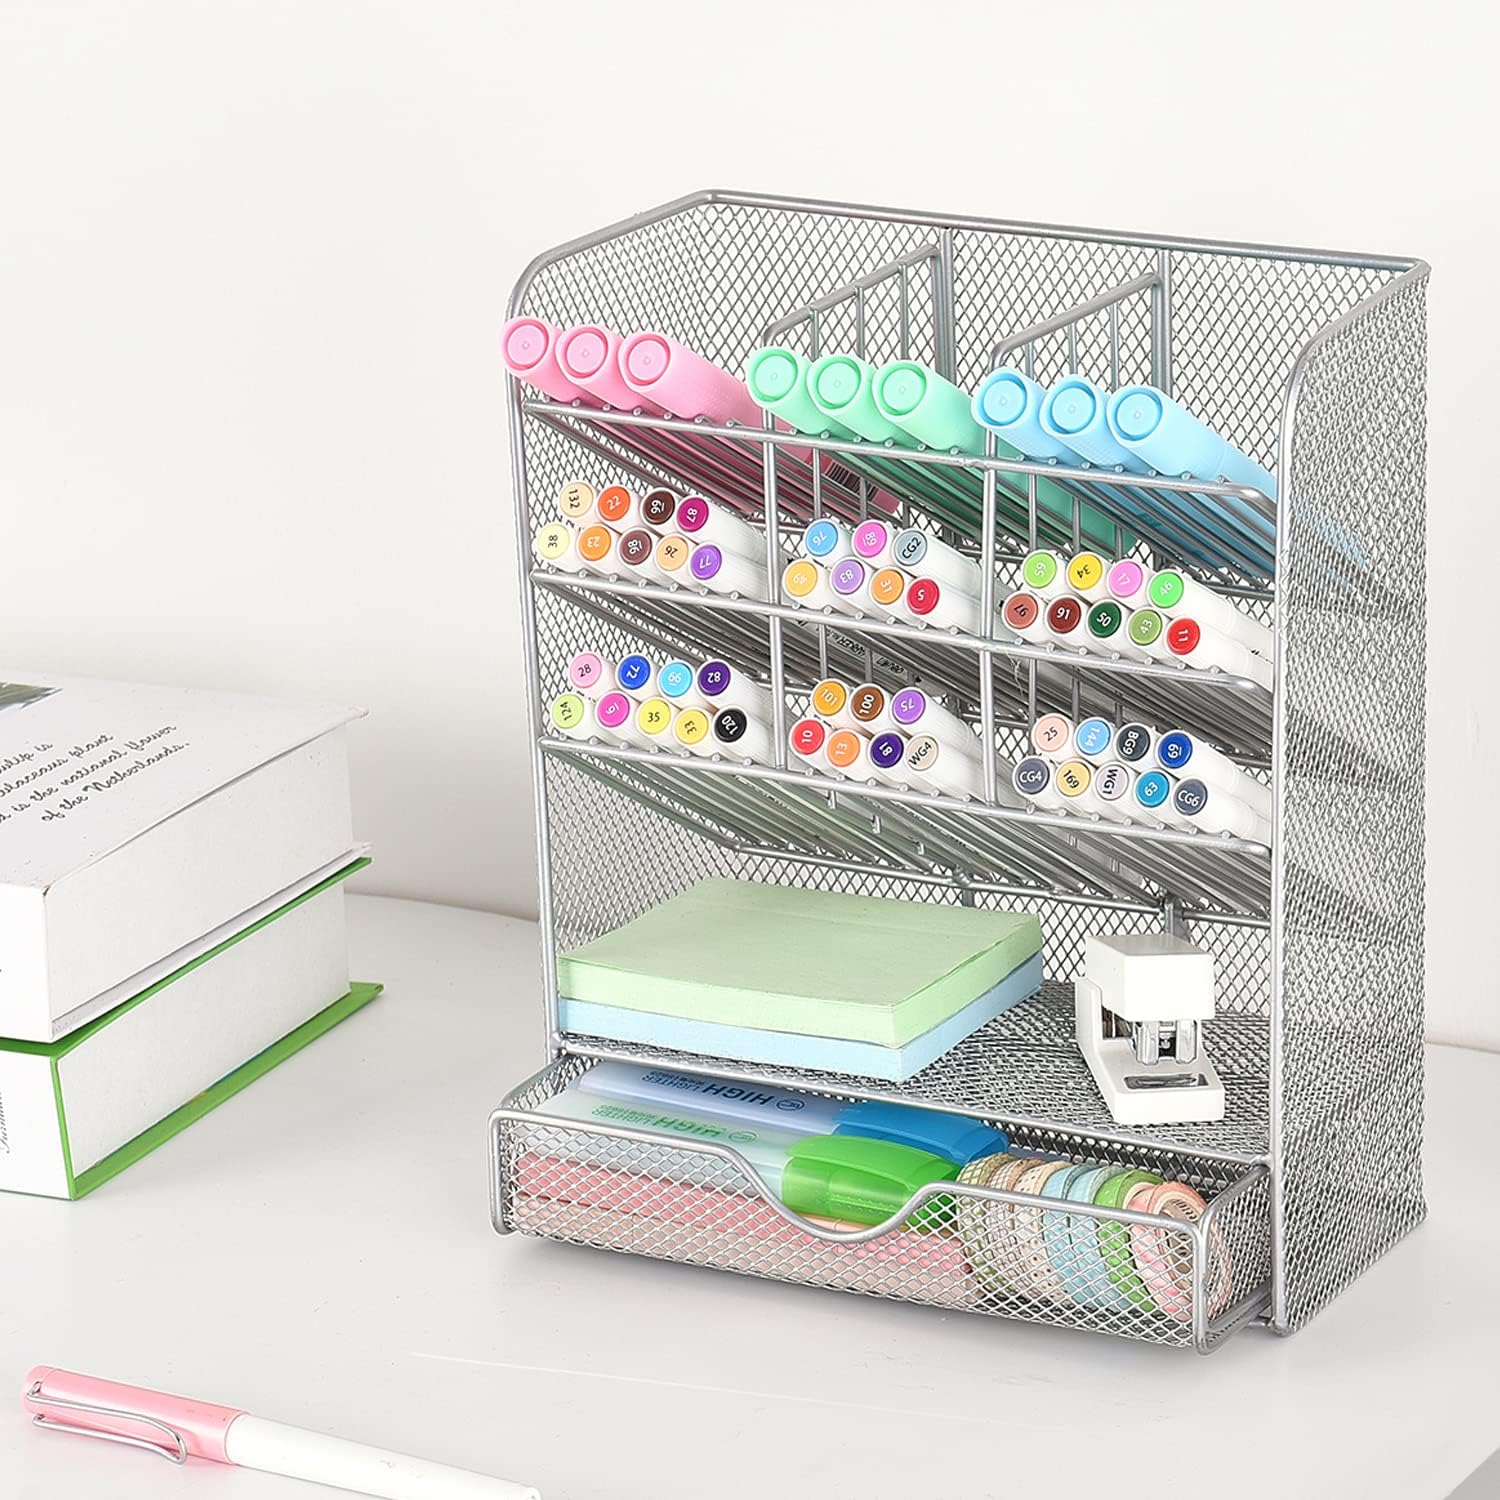 Metal Pen Holder Desk Organizer with 10 Compartments and 1 Drawer